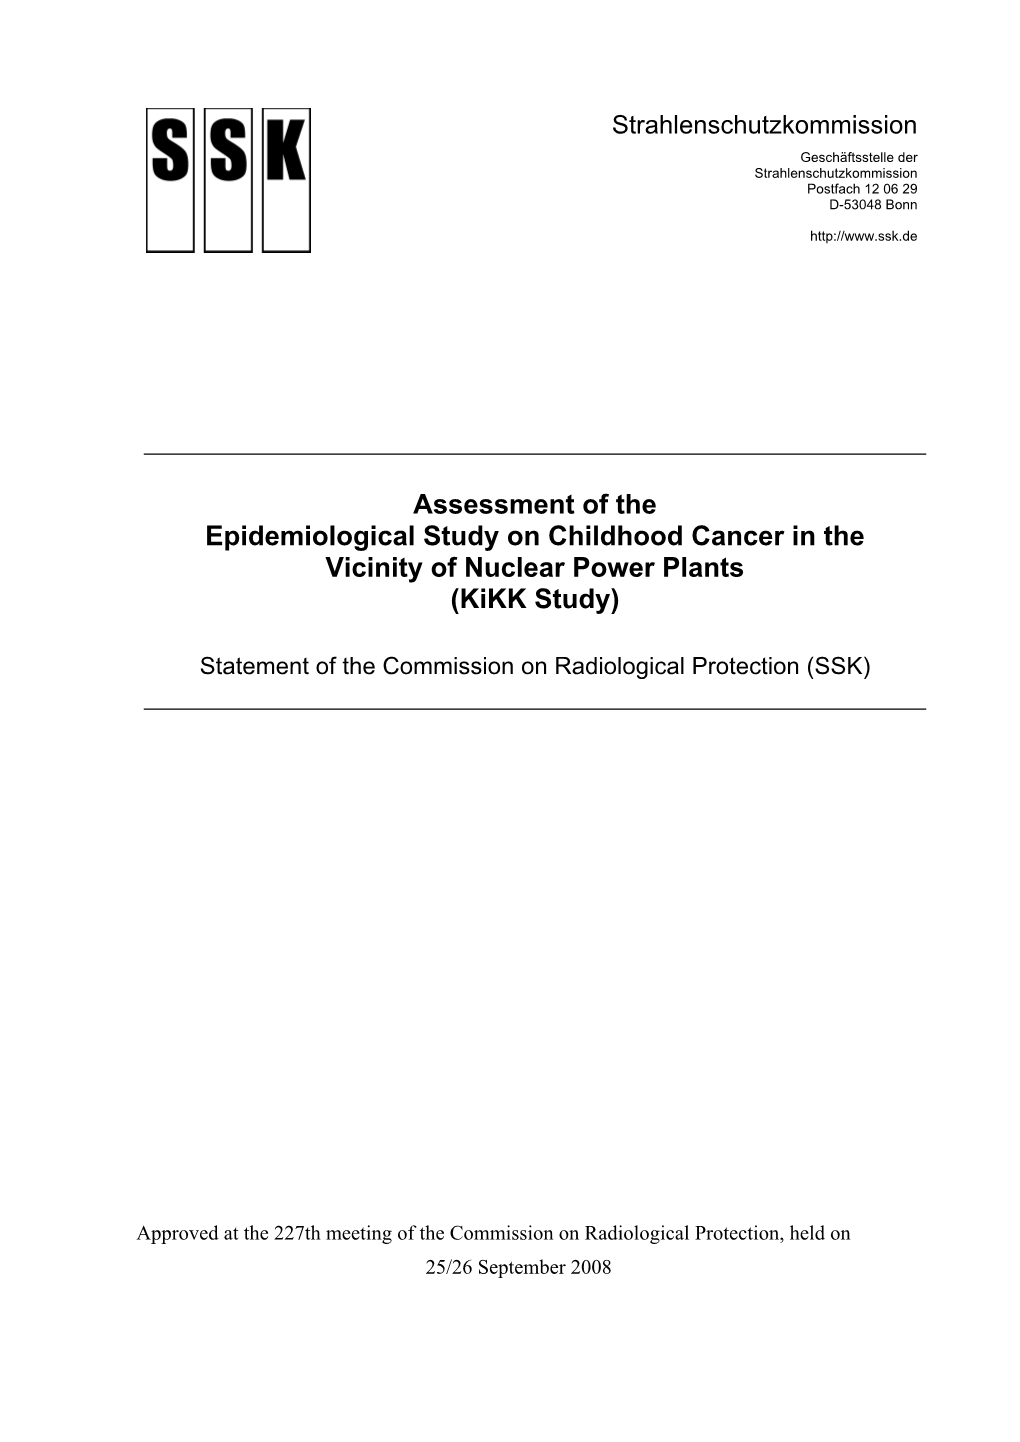 Assessment of the Epidemiological Study on Childhood Cancer in the Vicinity of Nuclear Power Plants (Kikk Study)